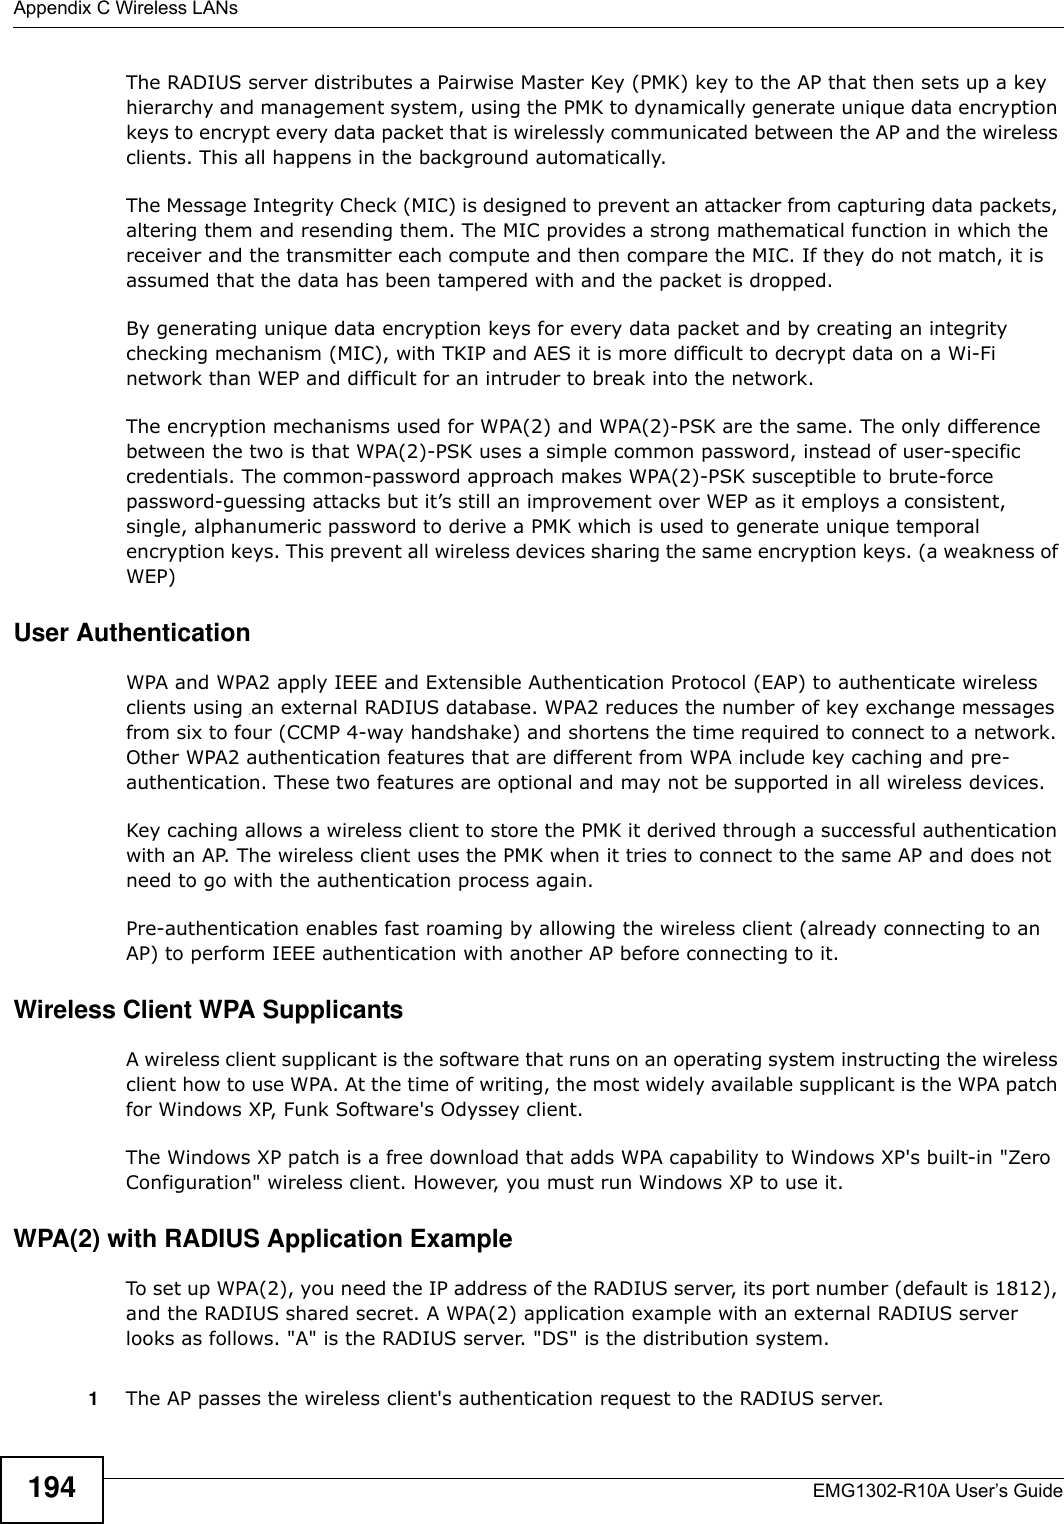 Appendix C Wireless LANsEMG1302-R10A User’s Guide194The RADIUS server distributes a Pairwise Master Key (PMK) key to the AP that then sets up a key hierarchy and management system, using the PMK to dynamically generate unique data encryption keys to encrypt every data packet that is wirelessly communicated between the AP and the wireless clients. This all happens in the background automatically.The Message Integrity Check (MIC) is designed to prevent an attacker from capturing data packets, altering them and resending them. The MIC provides a strong mathematical function in which the receiver and the transmitter each compute and then compare the MIC. If they do not match, it is assumed that the data has been tampered with and the packet is dropped. By generating unique data encryption keys for every data packet and by creating an integrity checking mechanism (MIC), with TKIP and AES it is more difficult to decrypt data on a Wi-Fi network than WEP and difficult for an intruder to break into the network. The encryption mechanisms used for WPA(2) and WPA(2)-PSK are the same. The only difference between the two is that WPA(2)-PSK uses a simple common password, instead of user-specific credentials. The common-password approach makes WPA(2)-PSK susceptible to brute-force password-guessing attacks but it’s still an improvement over WEP as it employs a consistent, single, alphanumeric password to derive a PMK which is used to generate unique temporal encryption keys. This prevent all wireless devices sharing the same encryption keys. (a weakness of WEP)User Authentication WPA and WPA2 apply IEEE and Extensible Authentication Protocol (EAP) to authenticate wireless clients using an external RADIUS database. WPA2 reduces the number of key exchange messages from six to four (CCMP 4-way handshake) and shortens the time required to connect to a network. Other WPA2 authentication features that are different from WPA include key caching and pre-authentication. These two features are optional and may not be supported in all wireless devices.Key caching allows a wireless client to store the PMK it derived through a successful authentication with an AP. The wireless client uses the PMK when it tries to connect to the same AP and does not need to go with the authentication process again.Pre-authentication enables fast roaming by allowing the wireless client (already connecting to an AP) to perform IEEE authentication with another AP before connecting to it.Wireless Client WPA SupplicantsA wireless client supplicant is the software that runs on an operating system instructing the wireless client how to use WPA. At the time of writing, the most widely available supplicant is the WPA patch for Windows XP, Funk Software&apos;s Odyssey client. The Windows XP patch is a free download that adds WPA capability to Windows XP&apos;s built-in &quot;Zero Configuration&quot; wireless client. However, you must run Windows XP to use it. WPA(2) with RADIUS Application ExampleTo set up WPA(2), you need the IP address of the RADIUS server, its port number (default is 1812), and the RADIUS shared secret. A WPA(2) application example with an external RADIUS server looks as follows. &quot;A&quot; is the RADIUS server. &quot;DS&quot; is the distribution system.1The AP passes the wireless client&apos;s authentication request to the RADIUS server.